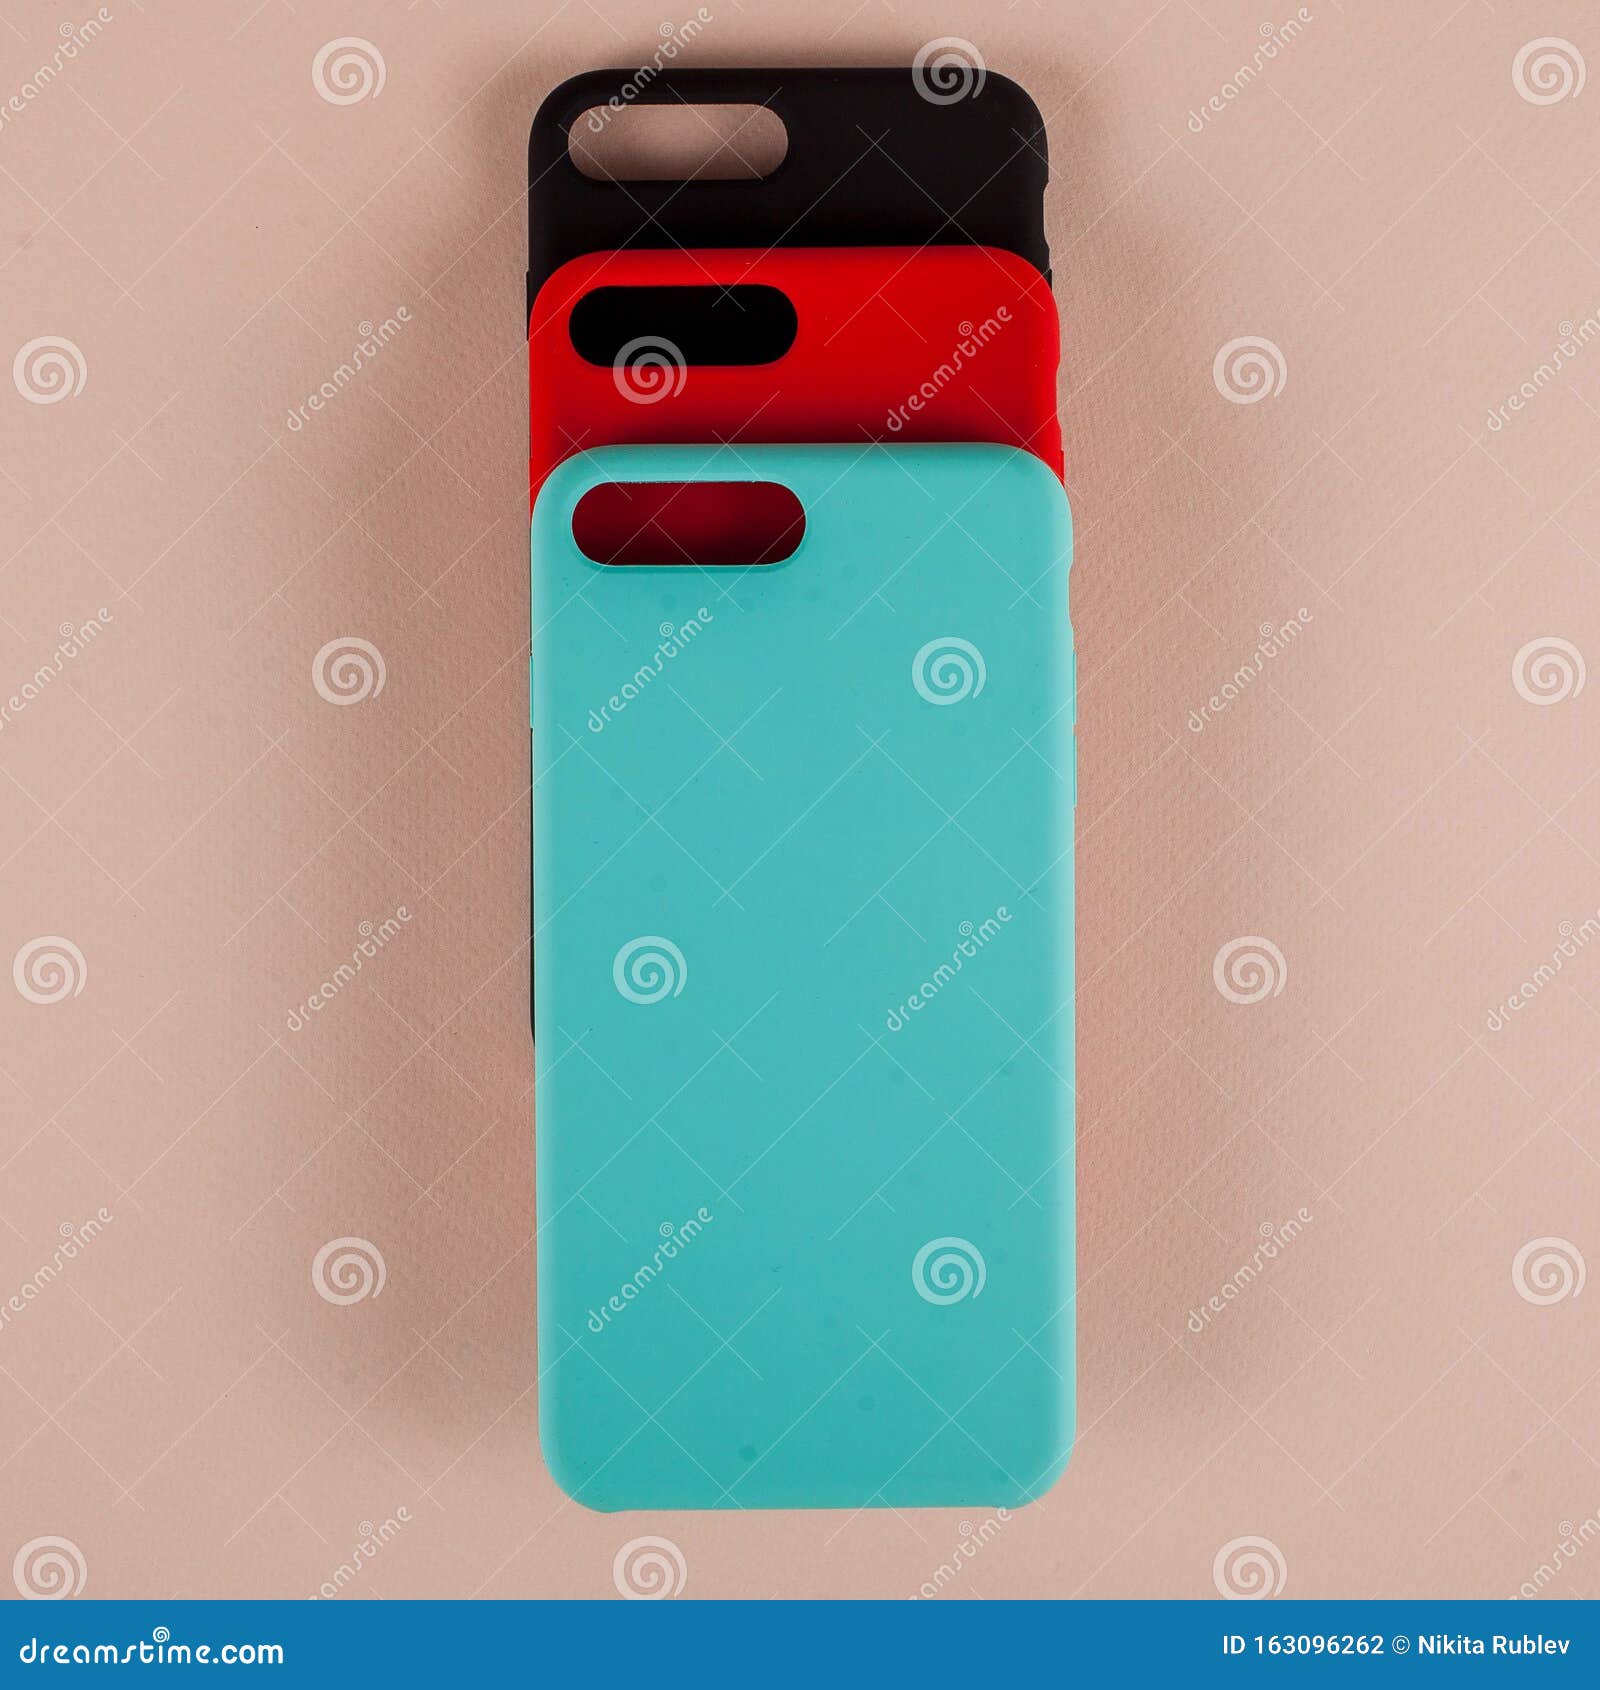 Cell Phone Case Various Colors on Beige Paper Background Stock Photo -  Image of smart, accessories: 163096262